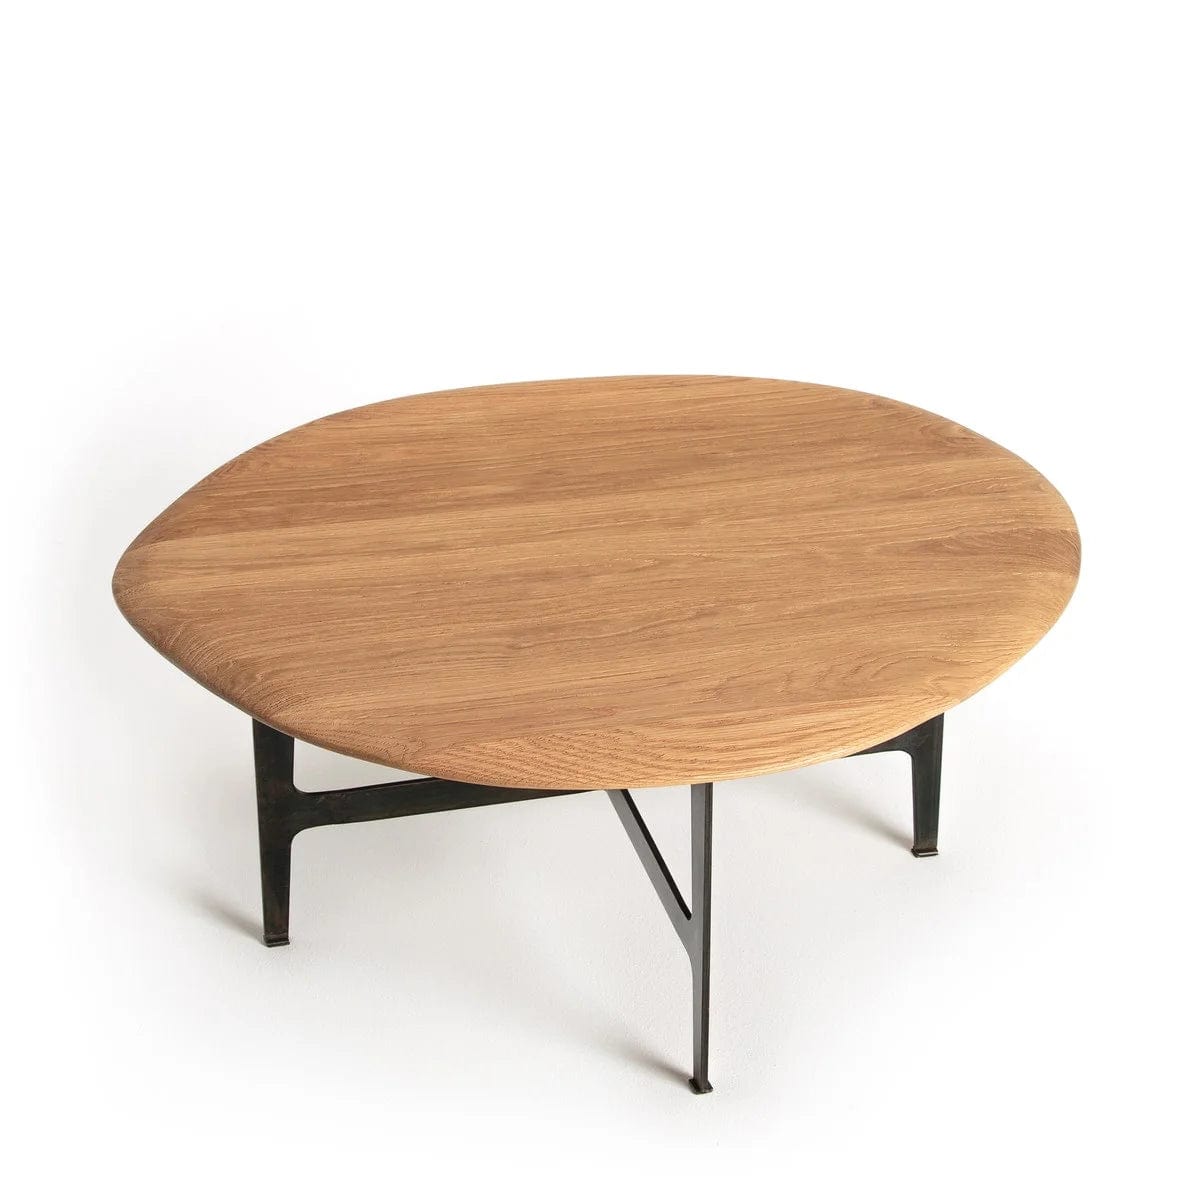 Grand table basse ronde